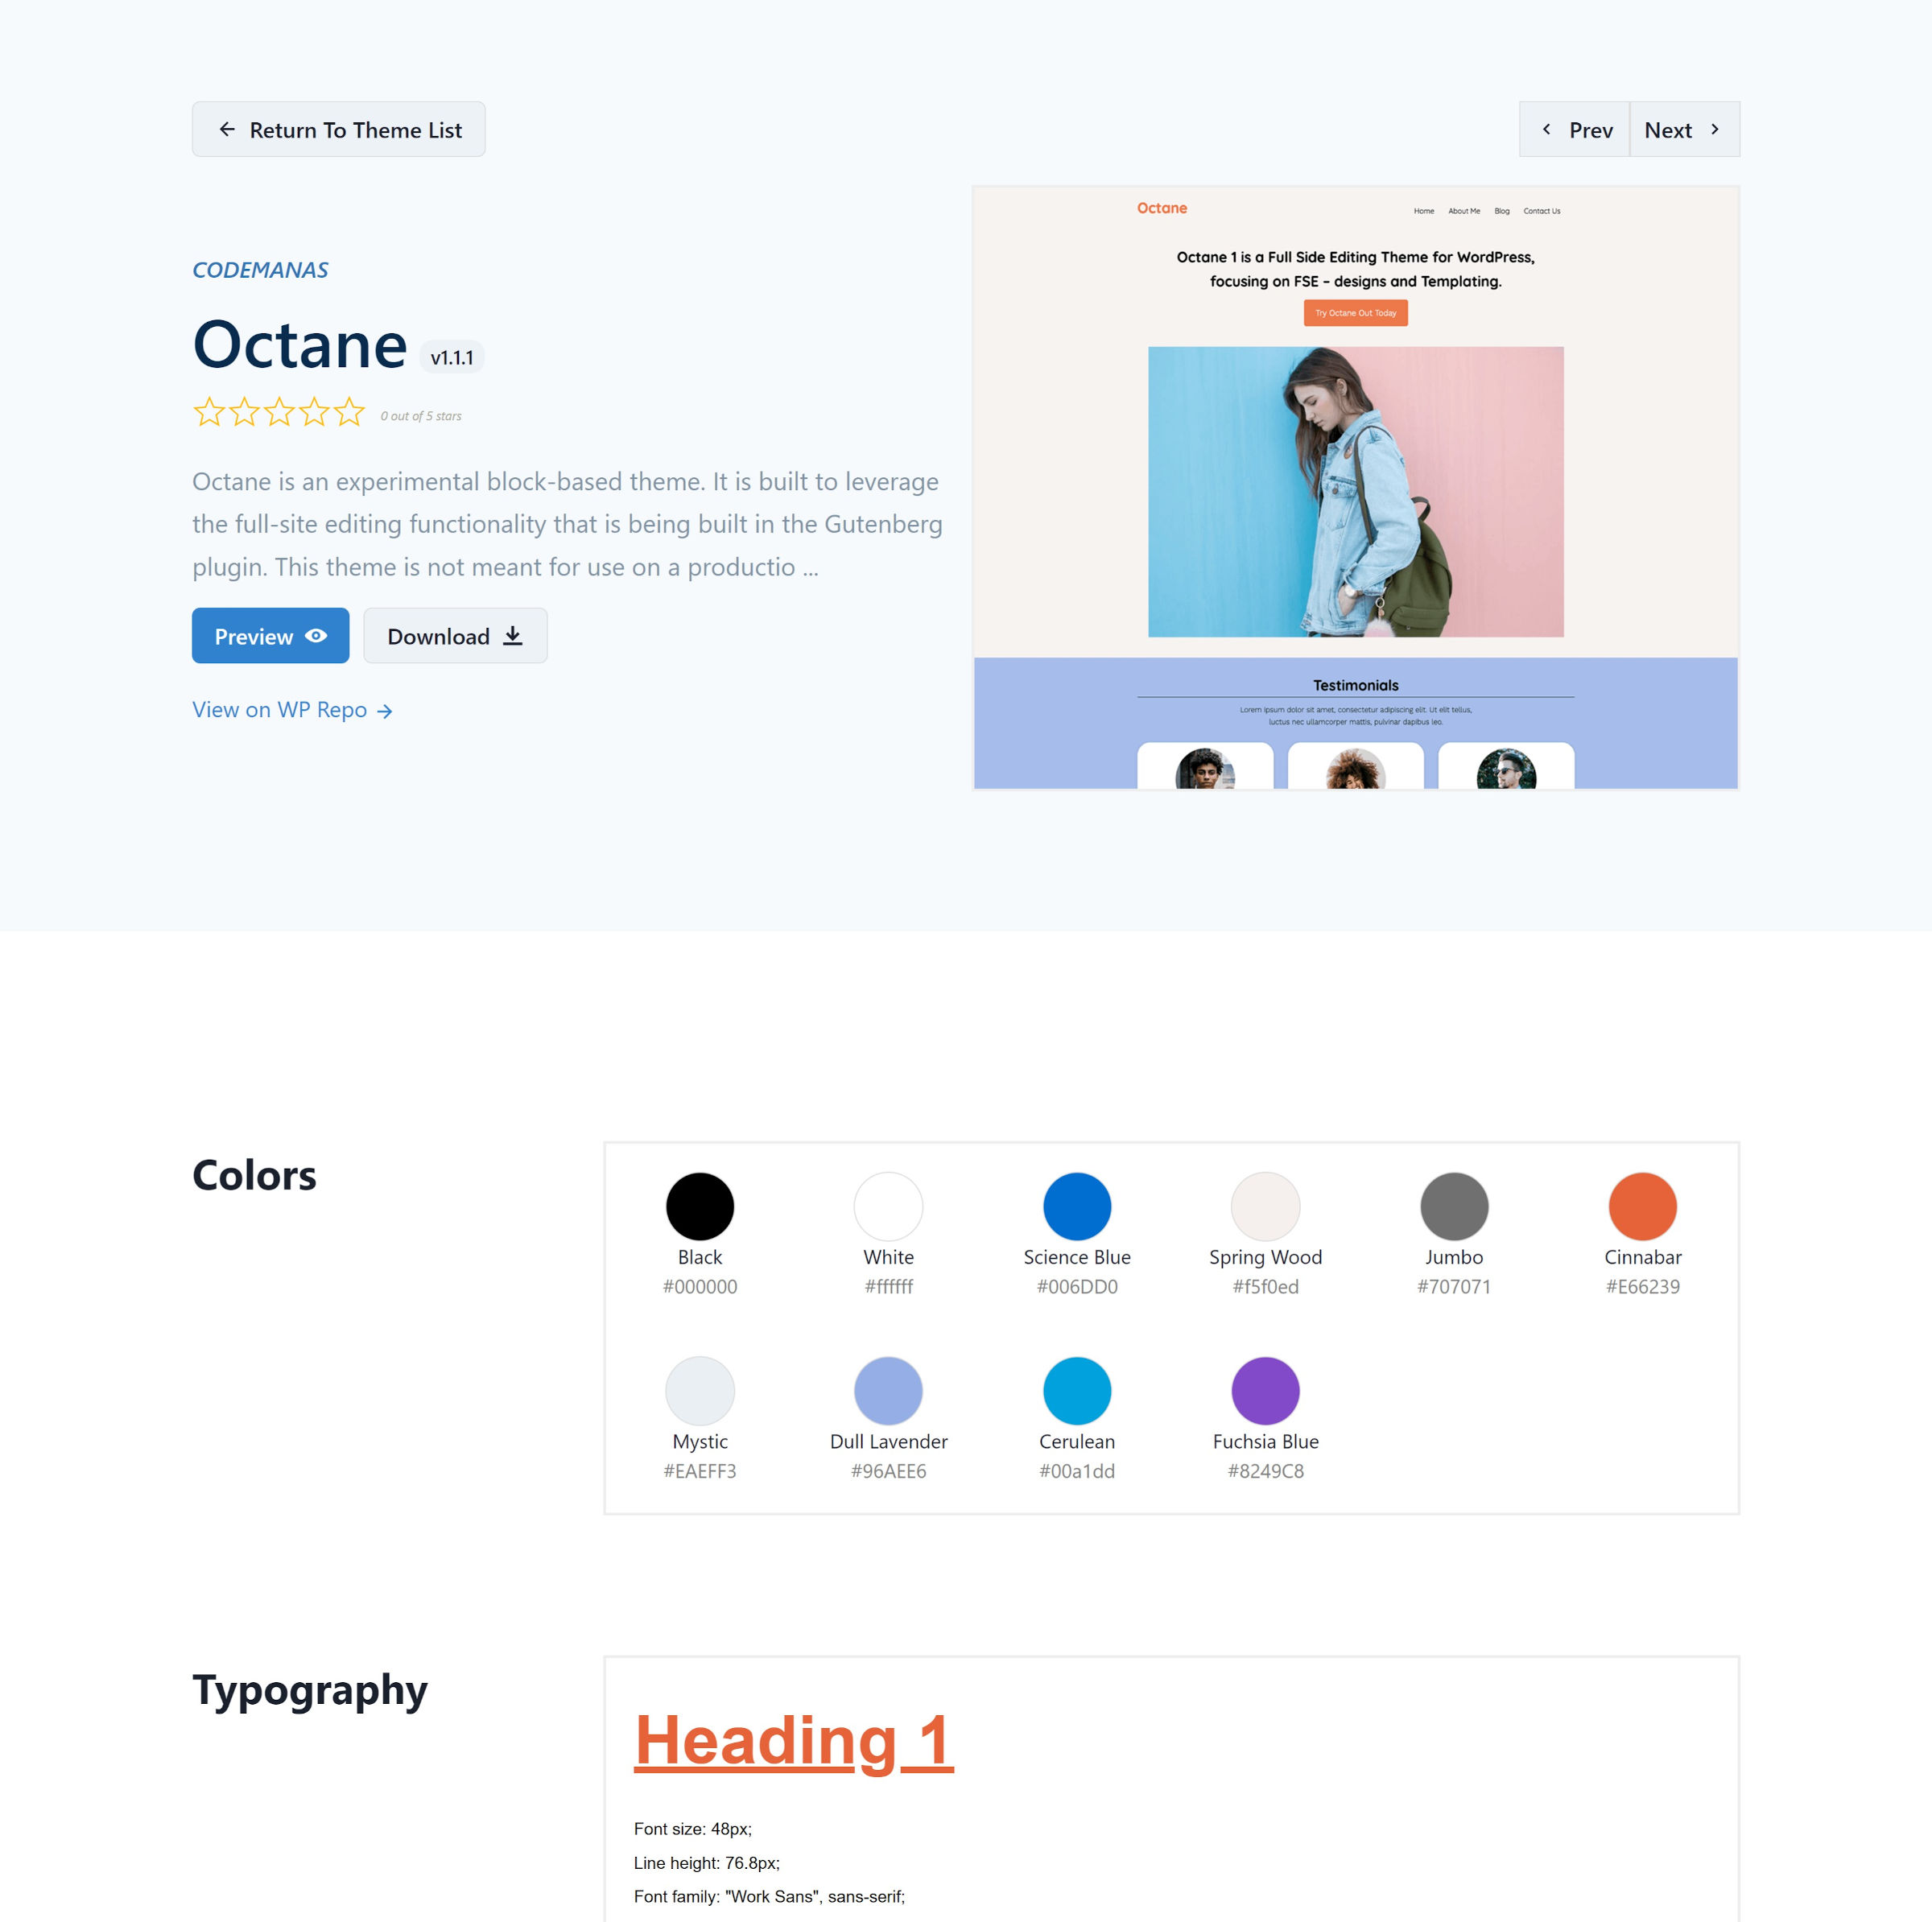 Screenshot of the Octane WordPress theme page on Gutenberg Hub. Includes theme description, screenshot, colors, and typography sections.